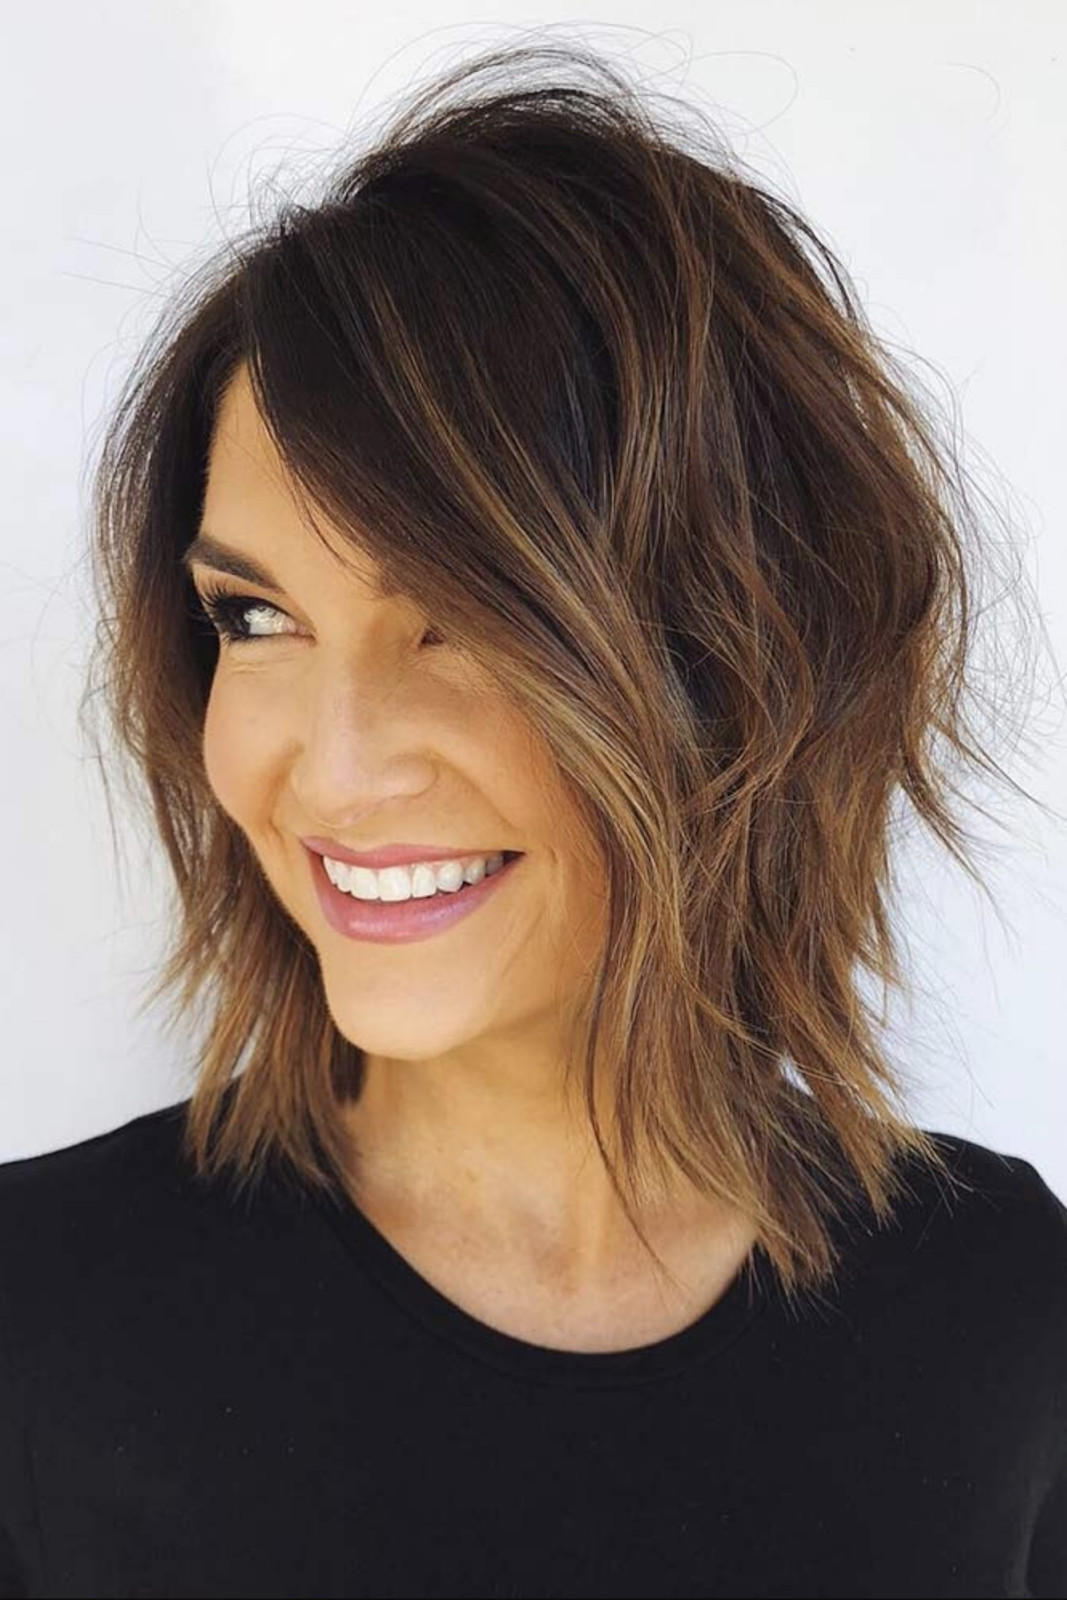 2020 Haircuts For Women
 2019 2020 Short Hairstyles for Women Over 50 That Are